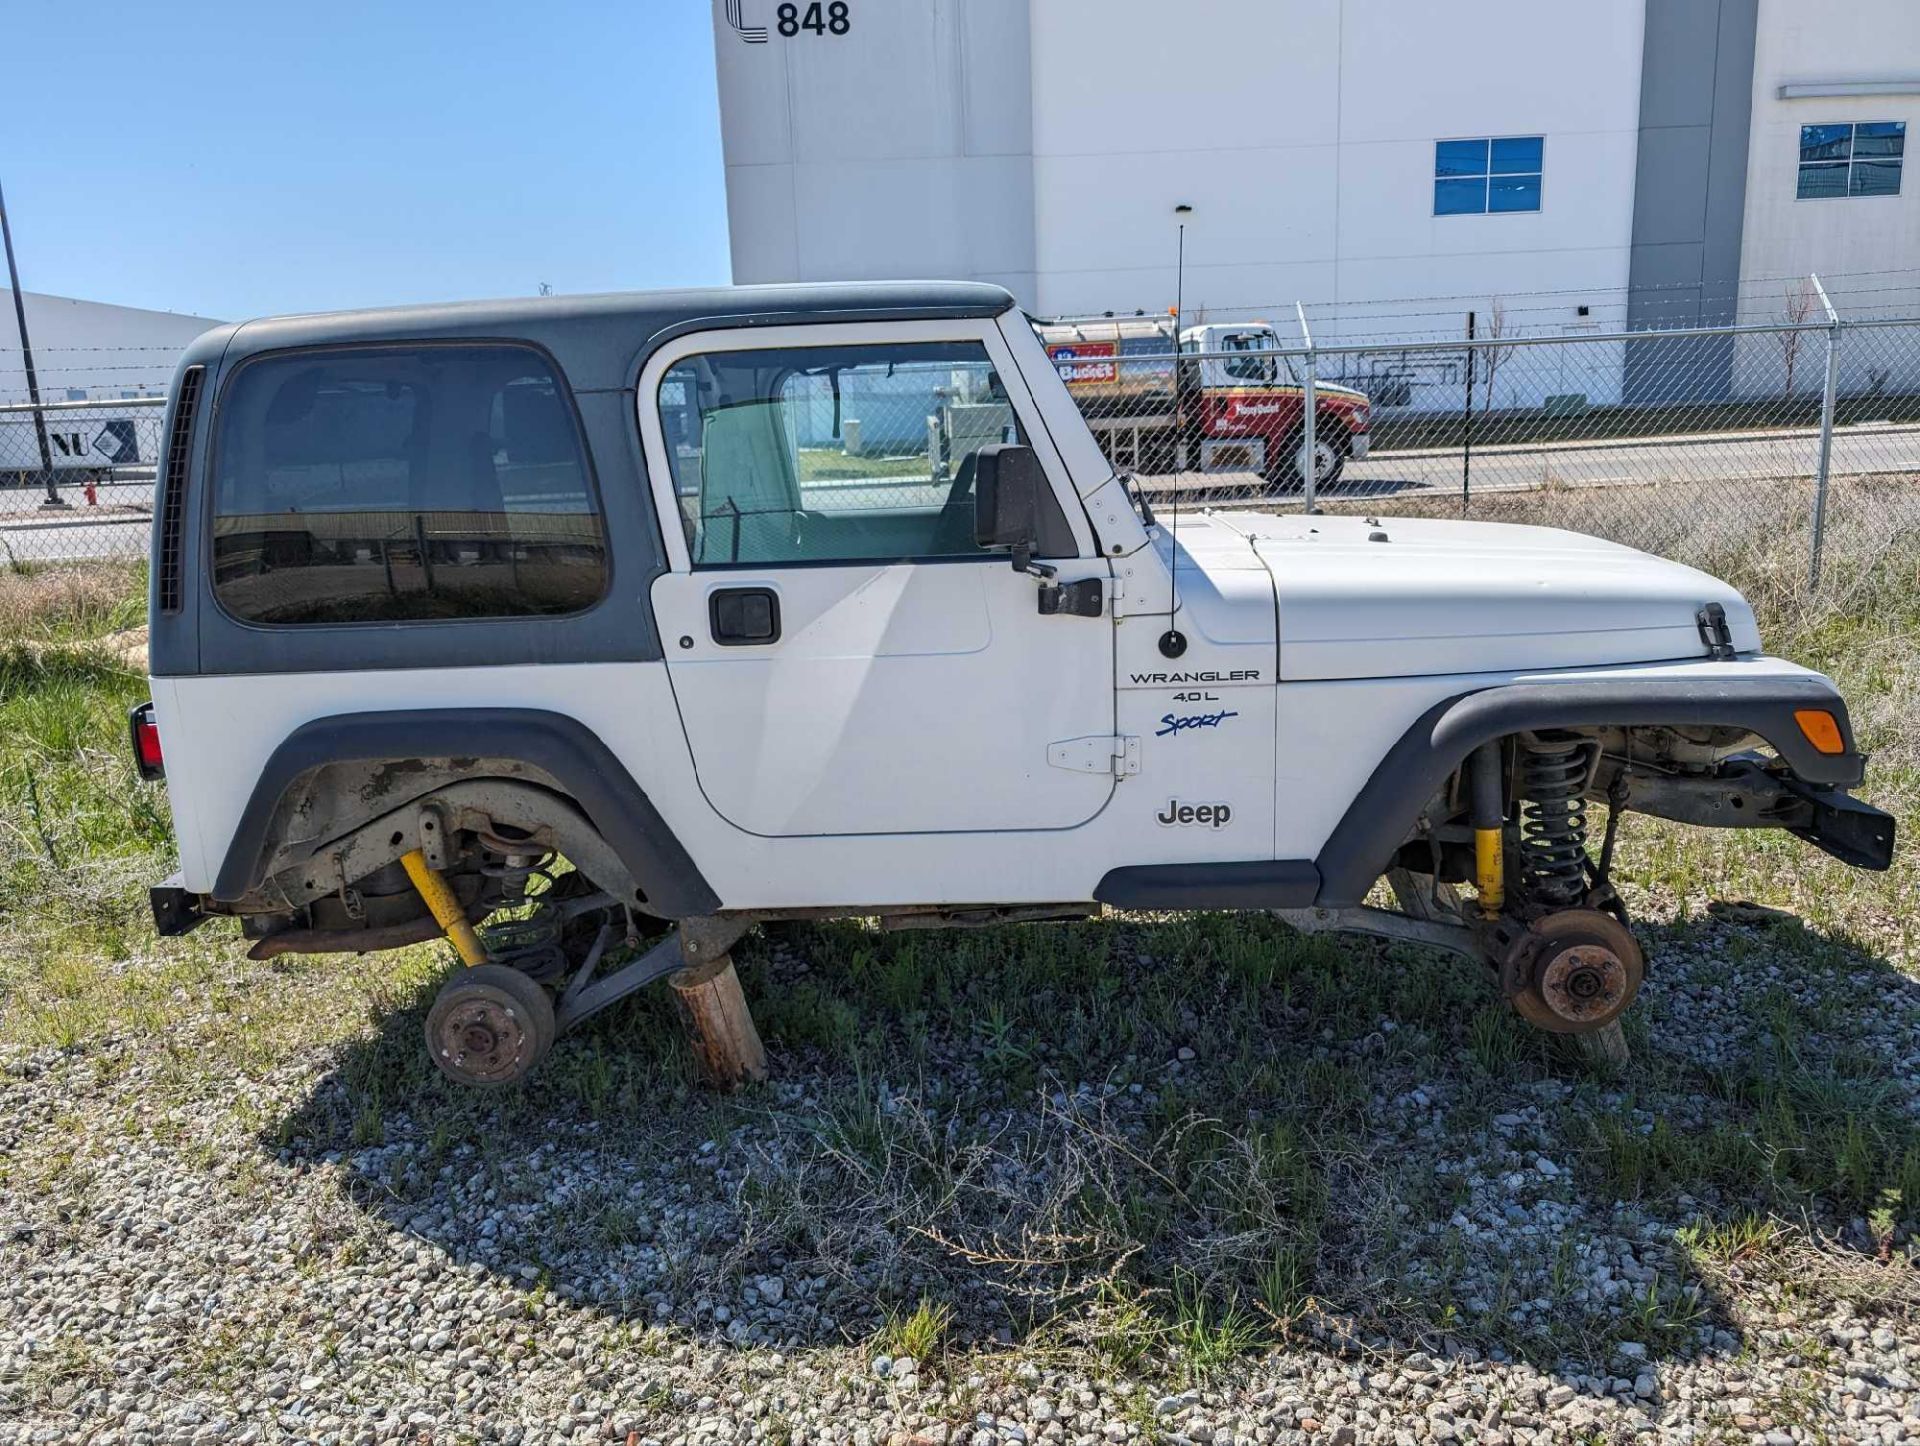 1998 Jeep Wrangler Sport 4wd, v6 VIN #: 1J4FY19S6WP712195 Features and Notes: currently not running. - Image 6 of 13